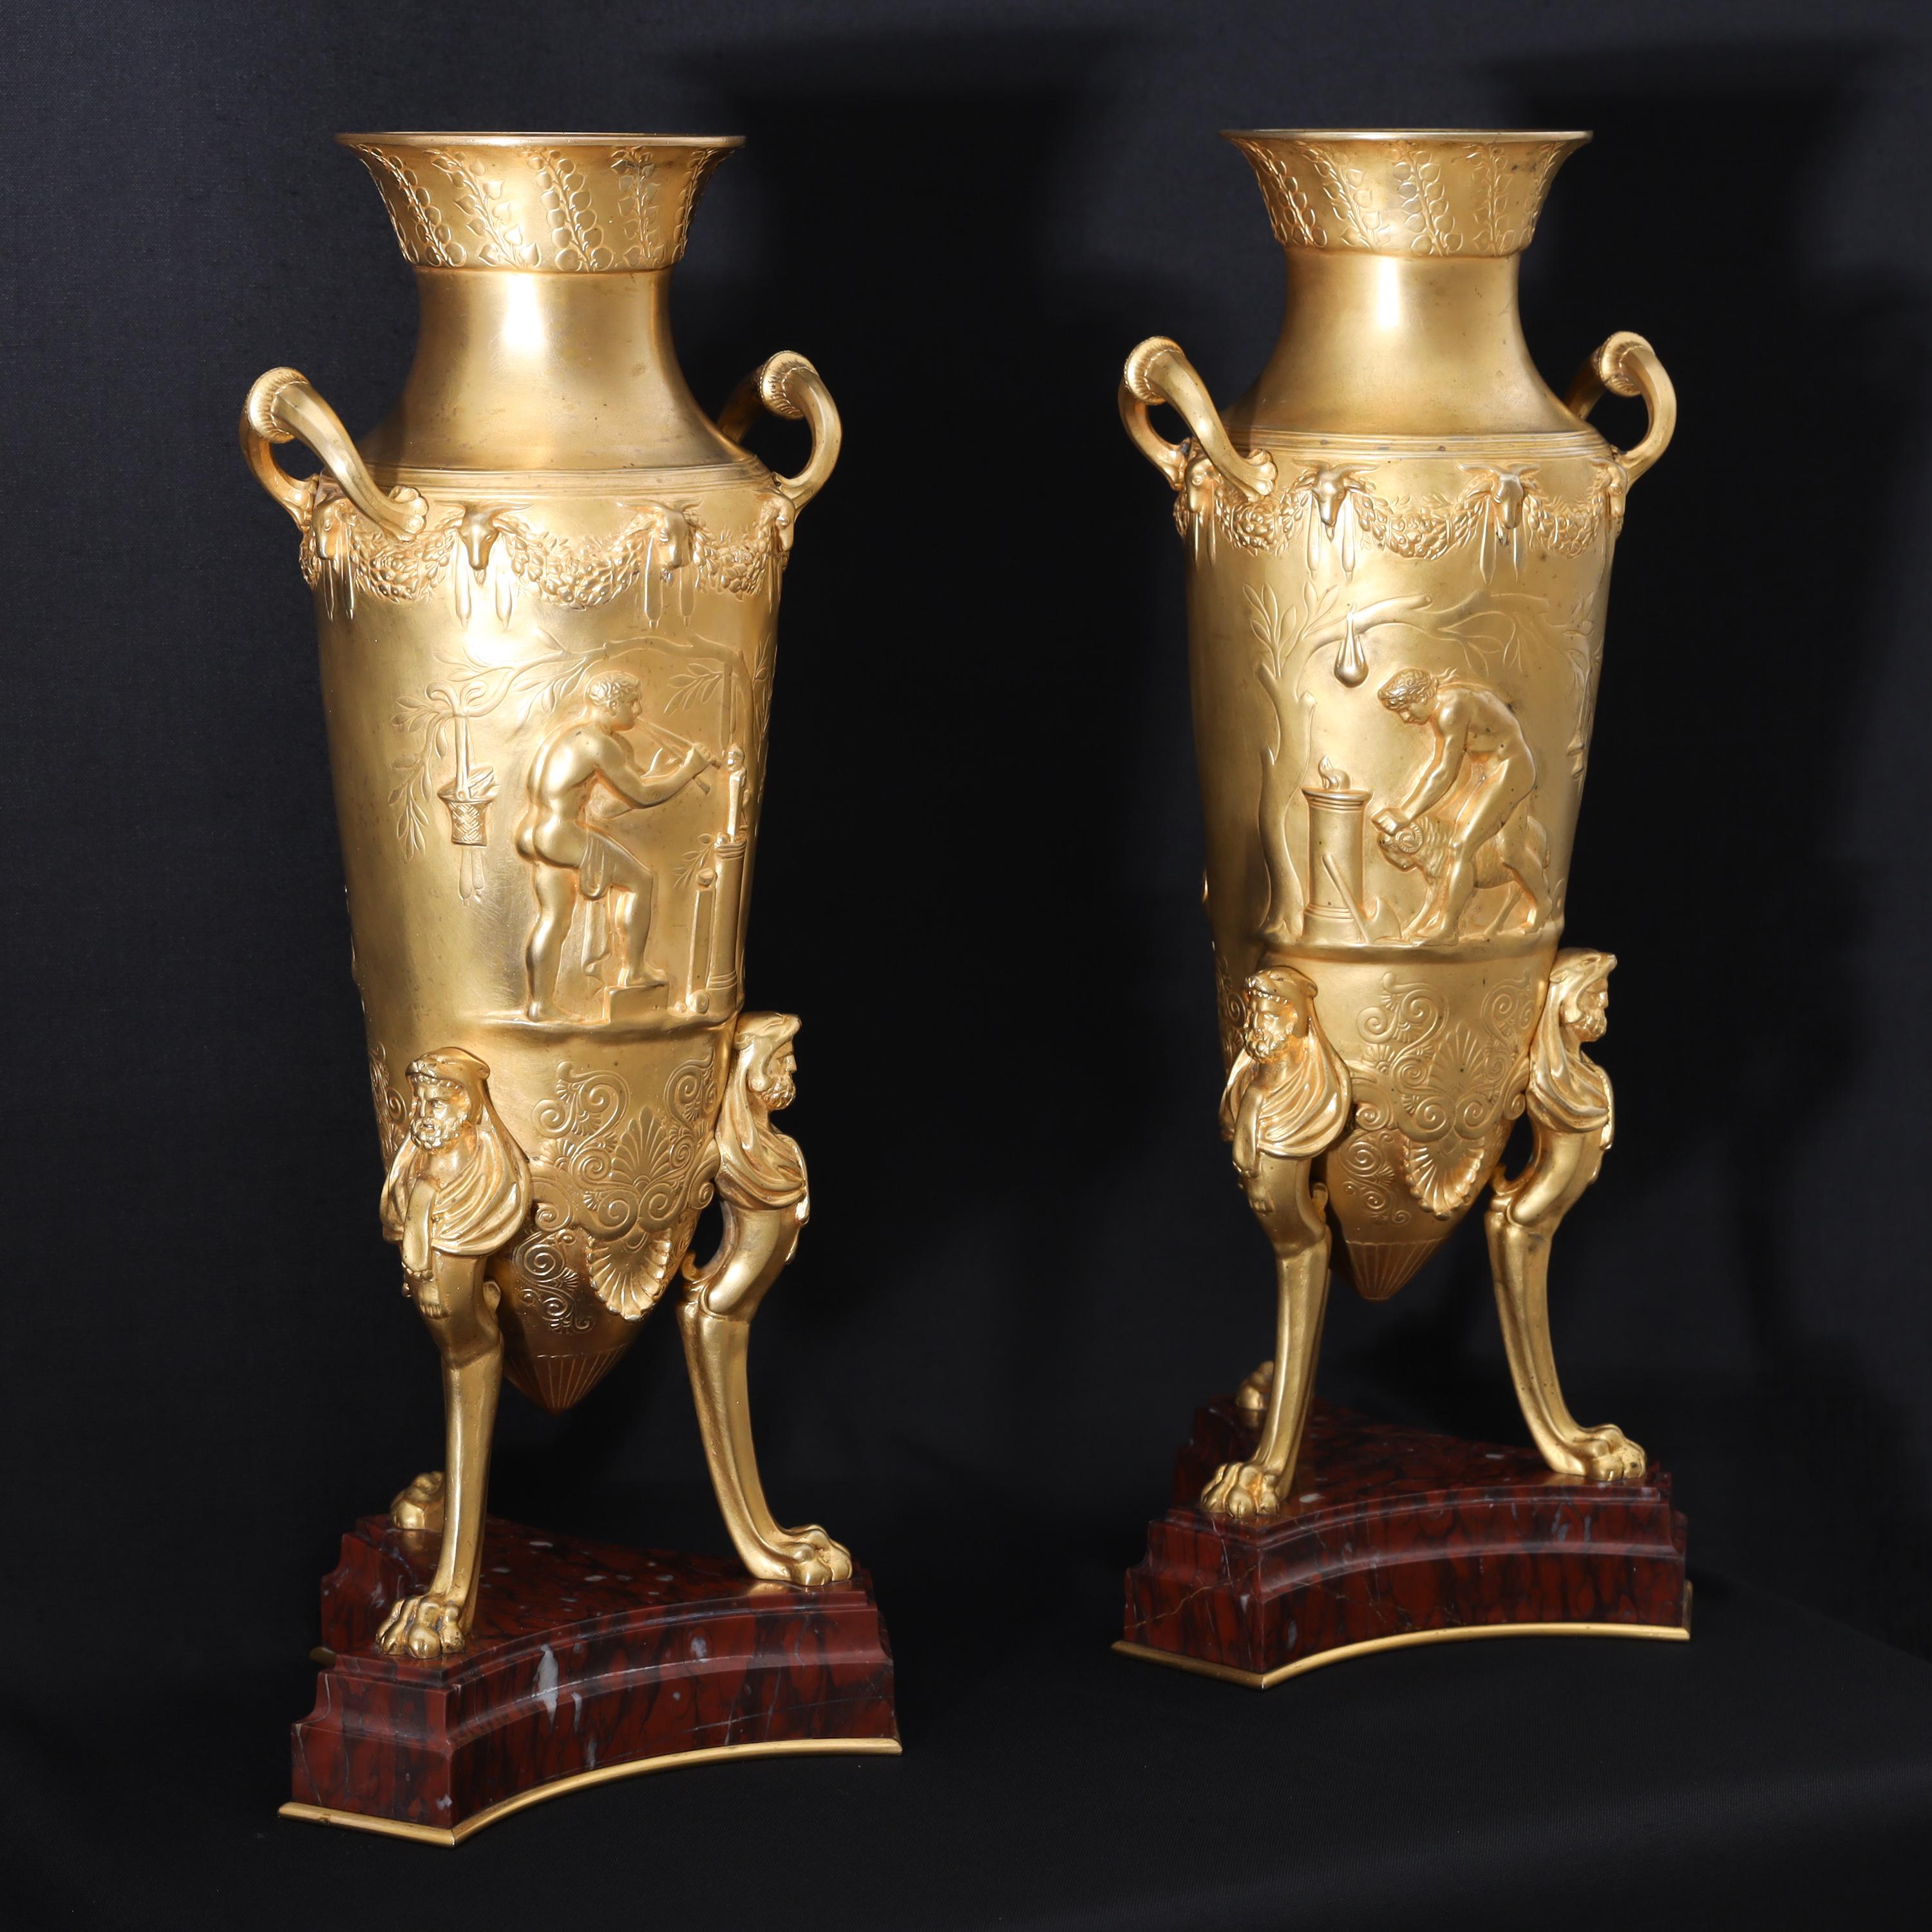 Pair of fire-gilt bronze amphorae by Ferdinand Levillain (1837-1905) and Ferdinand Barbedienne (1810-1892) on trefoil red marble bases. The vases stand on lion paw feet with Hercules atlases and antique scenes in low relief on the walls. Stamped on